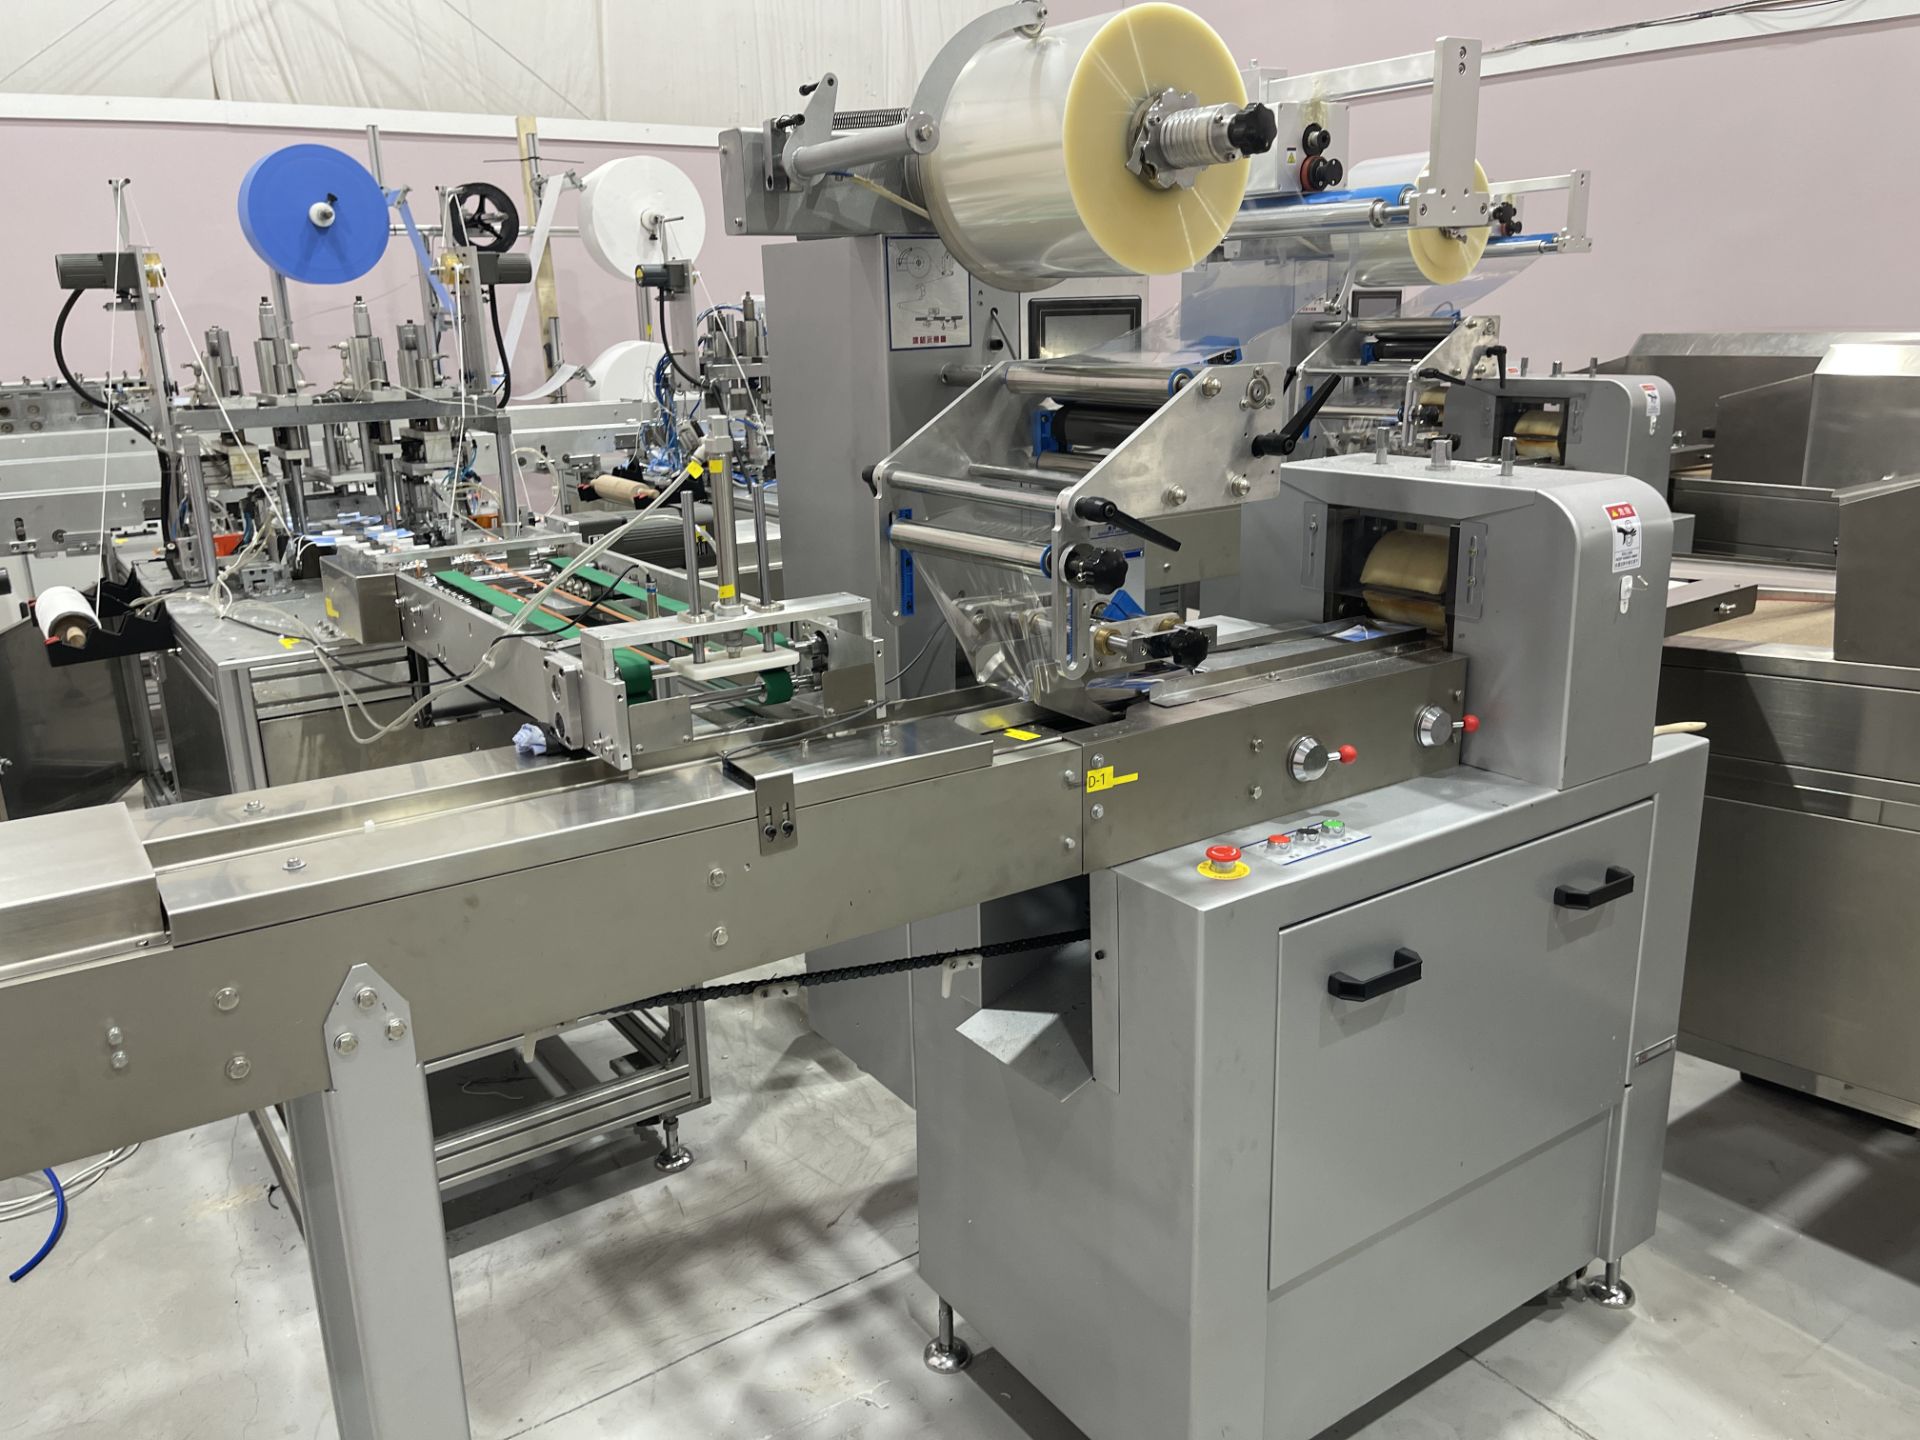 COMPLETE PACKAGE: 2020 3-Ply Disposable Medical Mask Assembly & Packaging Line Equipment, Includes: - Image 109 of 150